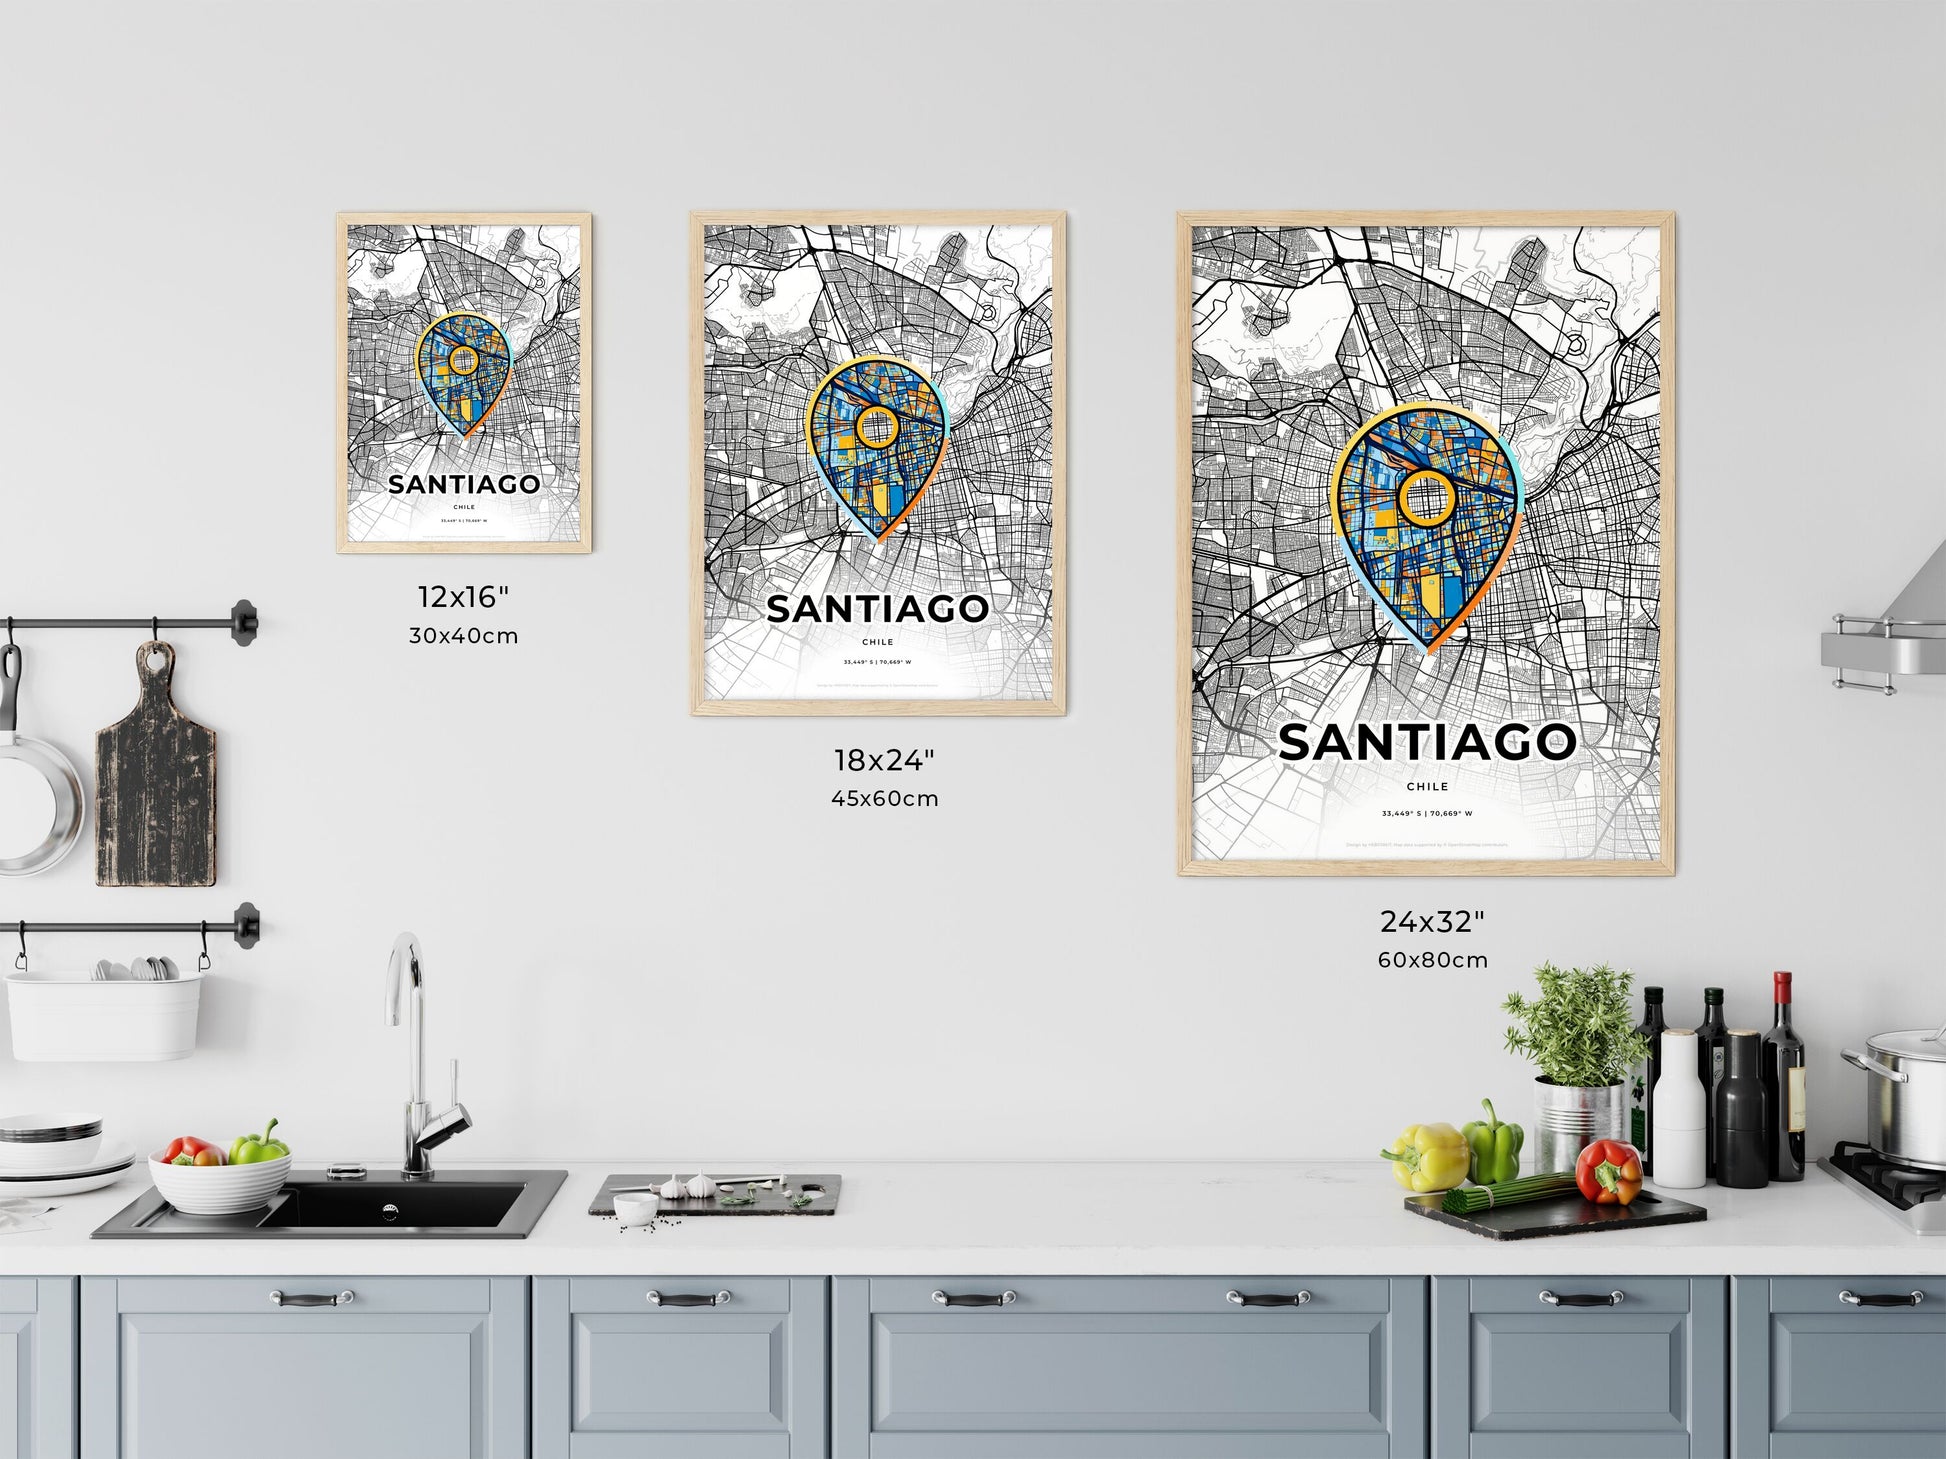 SANTIAGO CHILE minimal art map with a colorful icon.